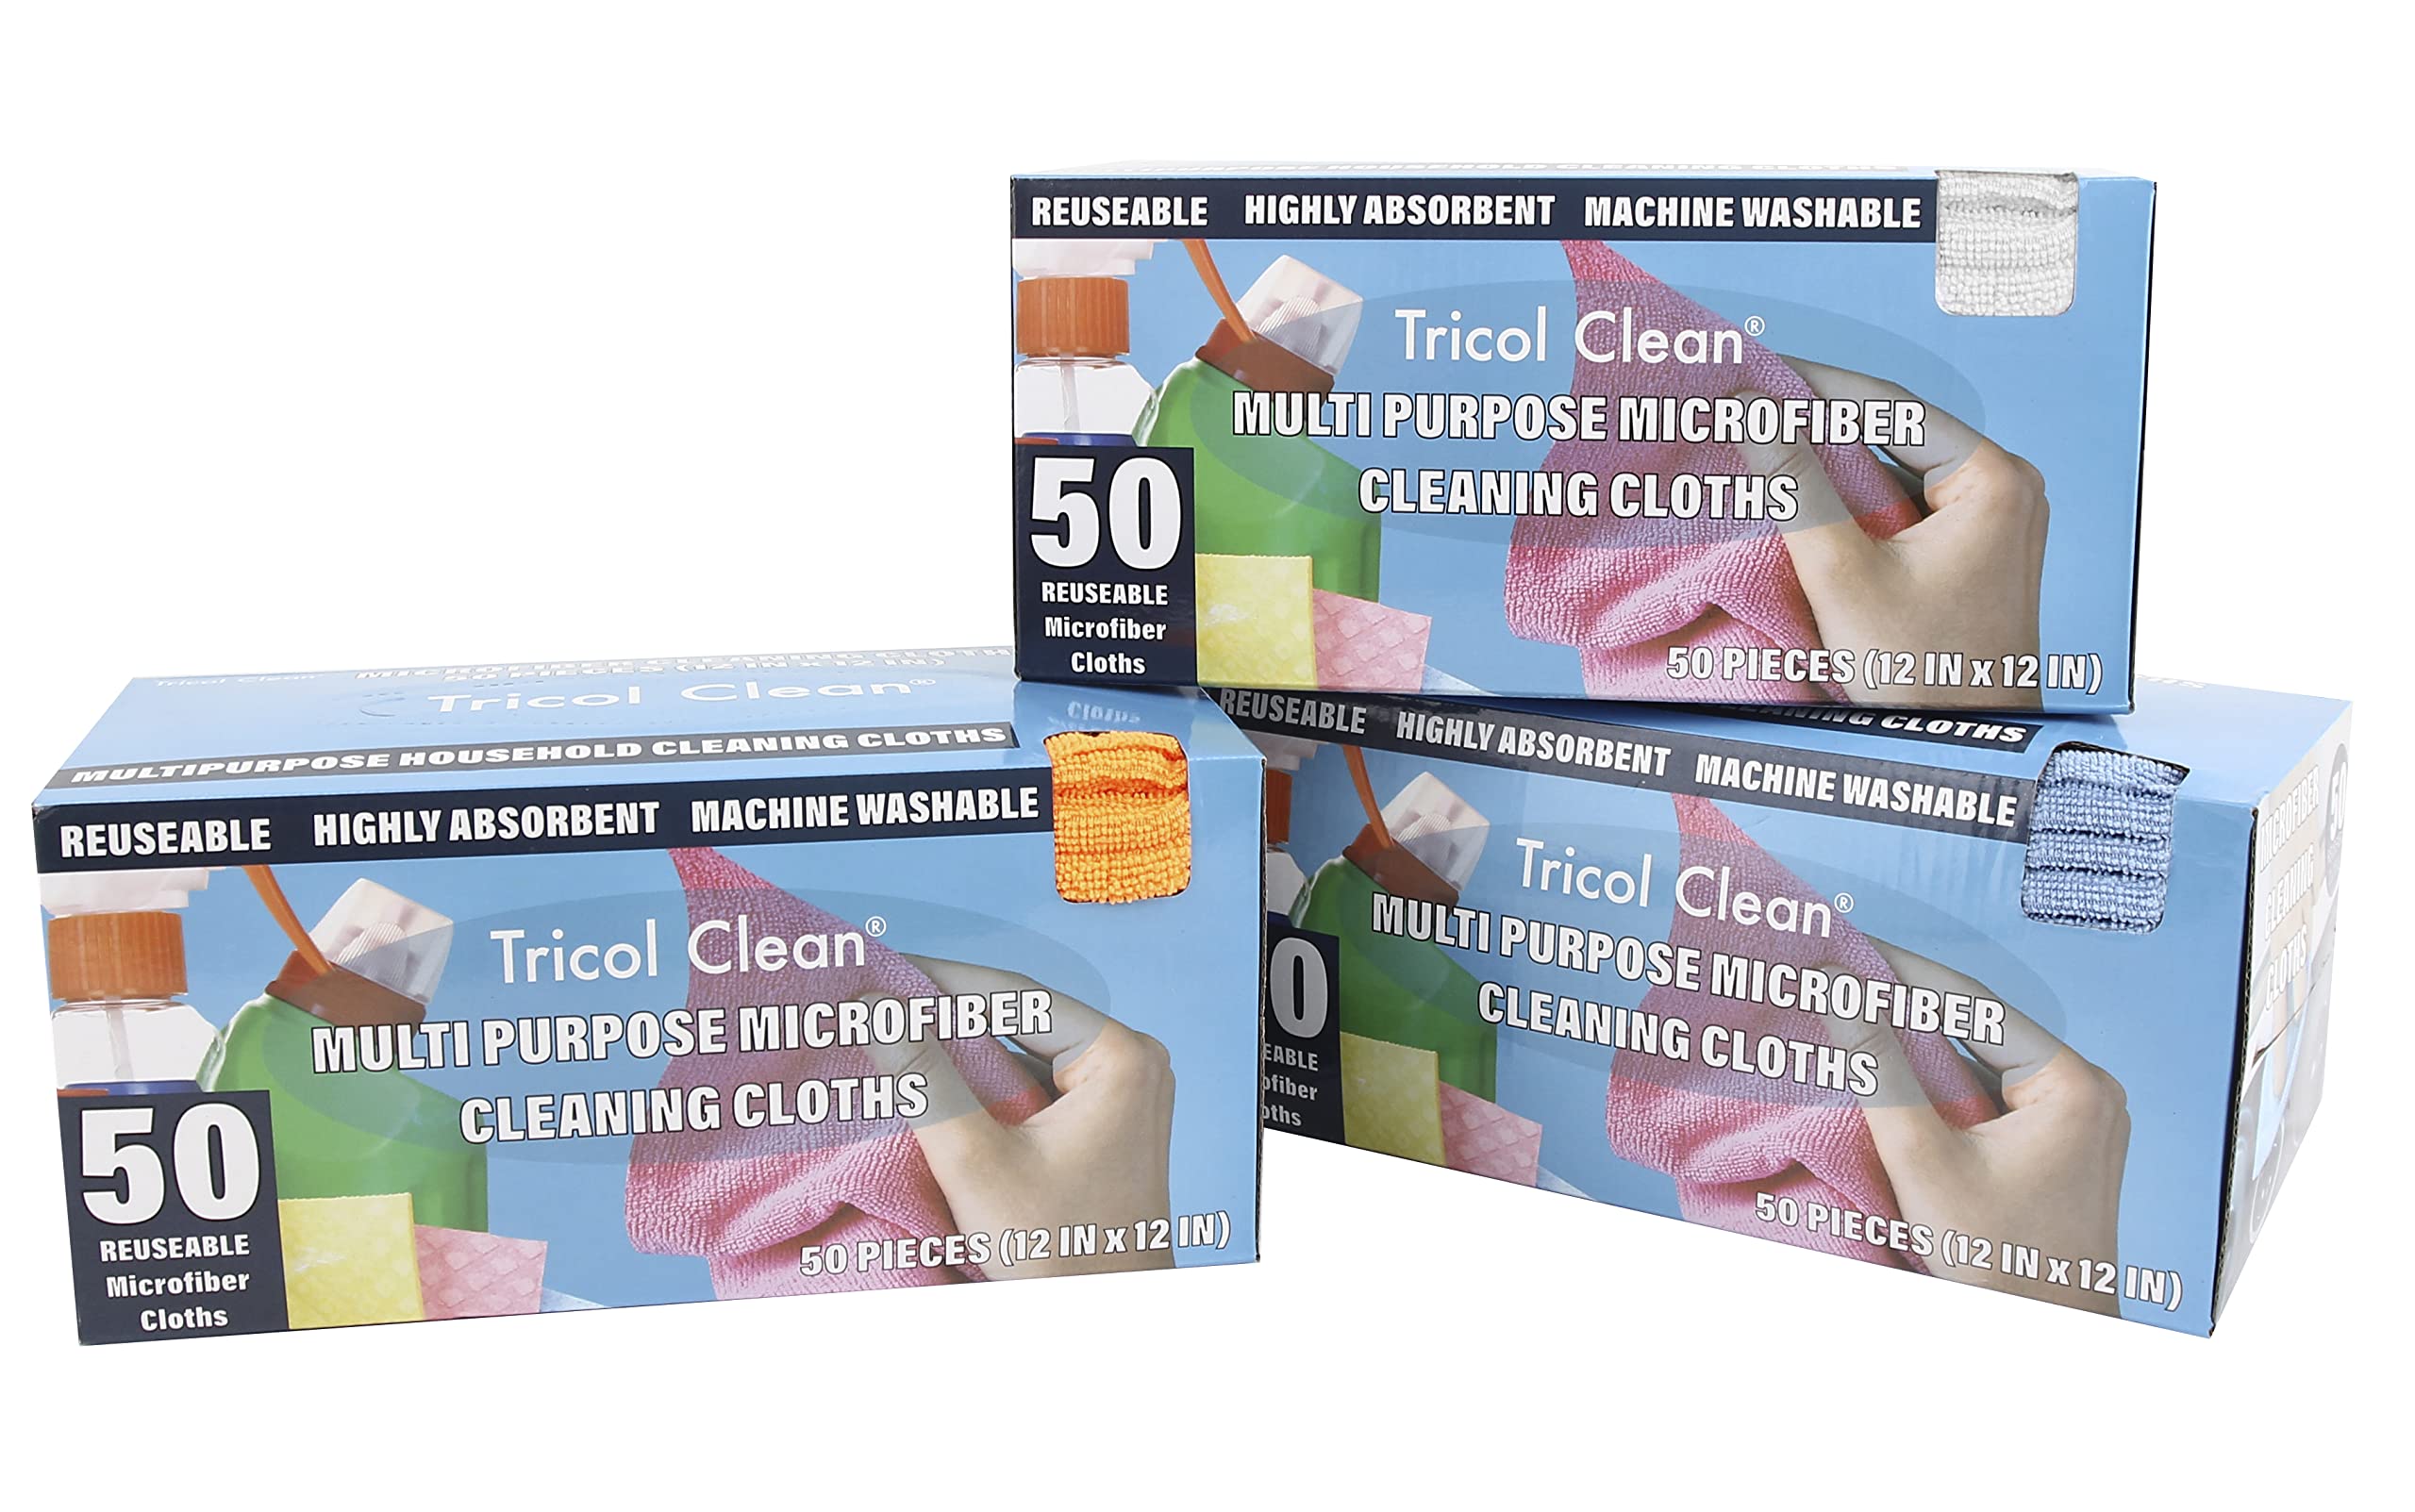 Tricol Clean Profesional Resuable Lint Free Microfiber Edgeless Cleaning Cloth Rag 50PK in Dispenser Box for Housekeeping, Car Cleaning (12 * 12 Inches), Orange